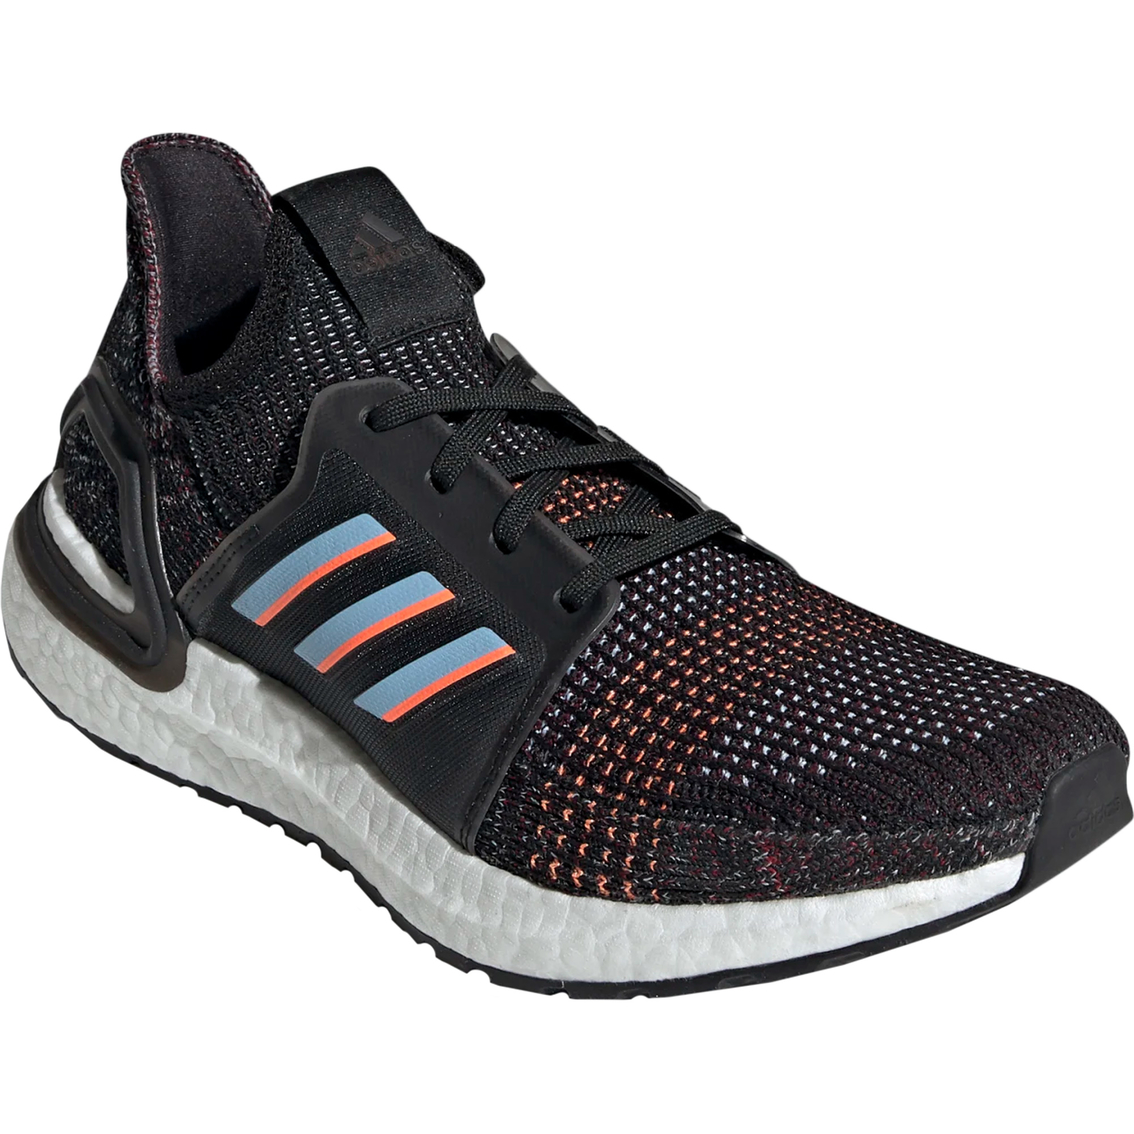 Adidas Men's Ultraboost 19 Running Shoes | Sneakers | Shoes | Shop ... قلمي